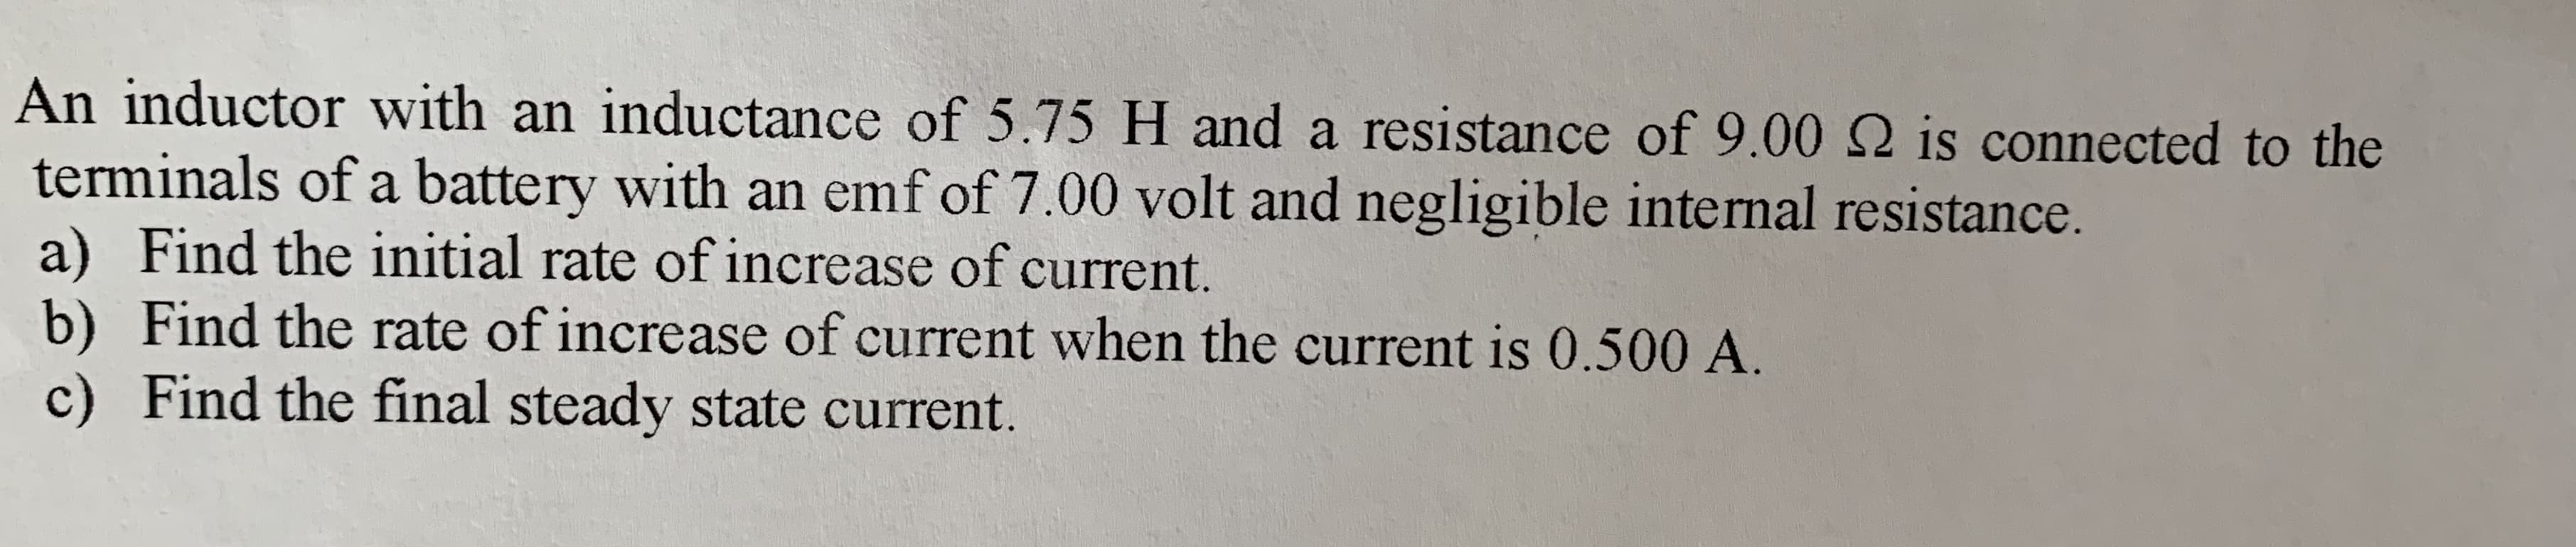 An inductor with an inductance of 5.75 H and a resistance of 9.00 2 is connected to the
terminals of a battery with an emf of 7.00 volt and negligible internal resistance.
a) Find the initial rate of increase of current.
b) Find the rate of increase of current when the current is 0.500 A.
c) Find the final steady state current.
